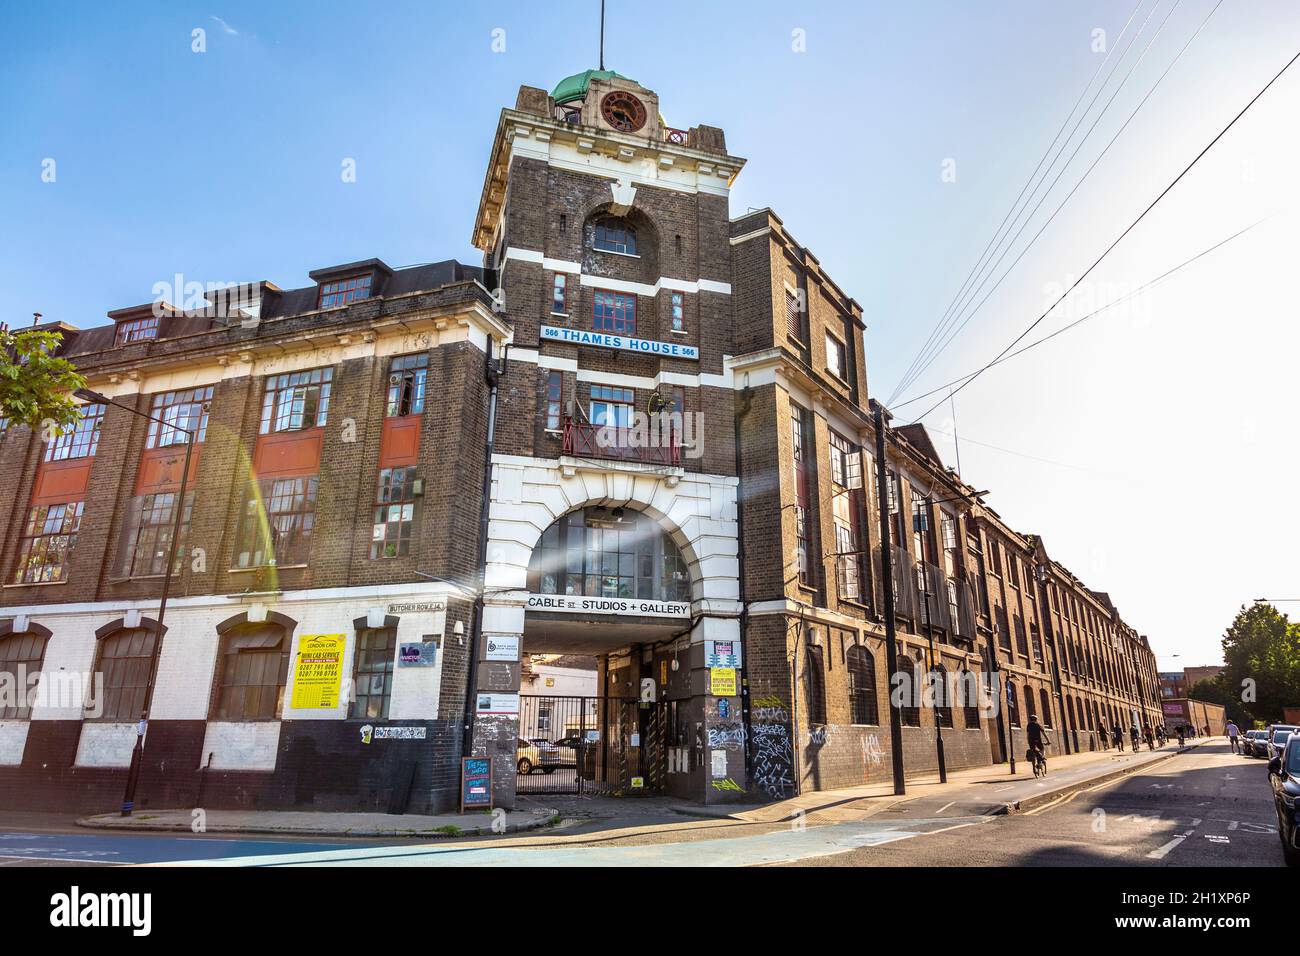 Exterior of the Thames House now housing Cable Street Studios, Cable Street, Limehouse, London, UK Stock Photo